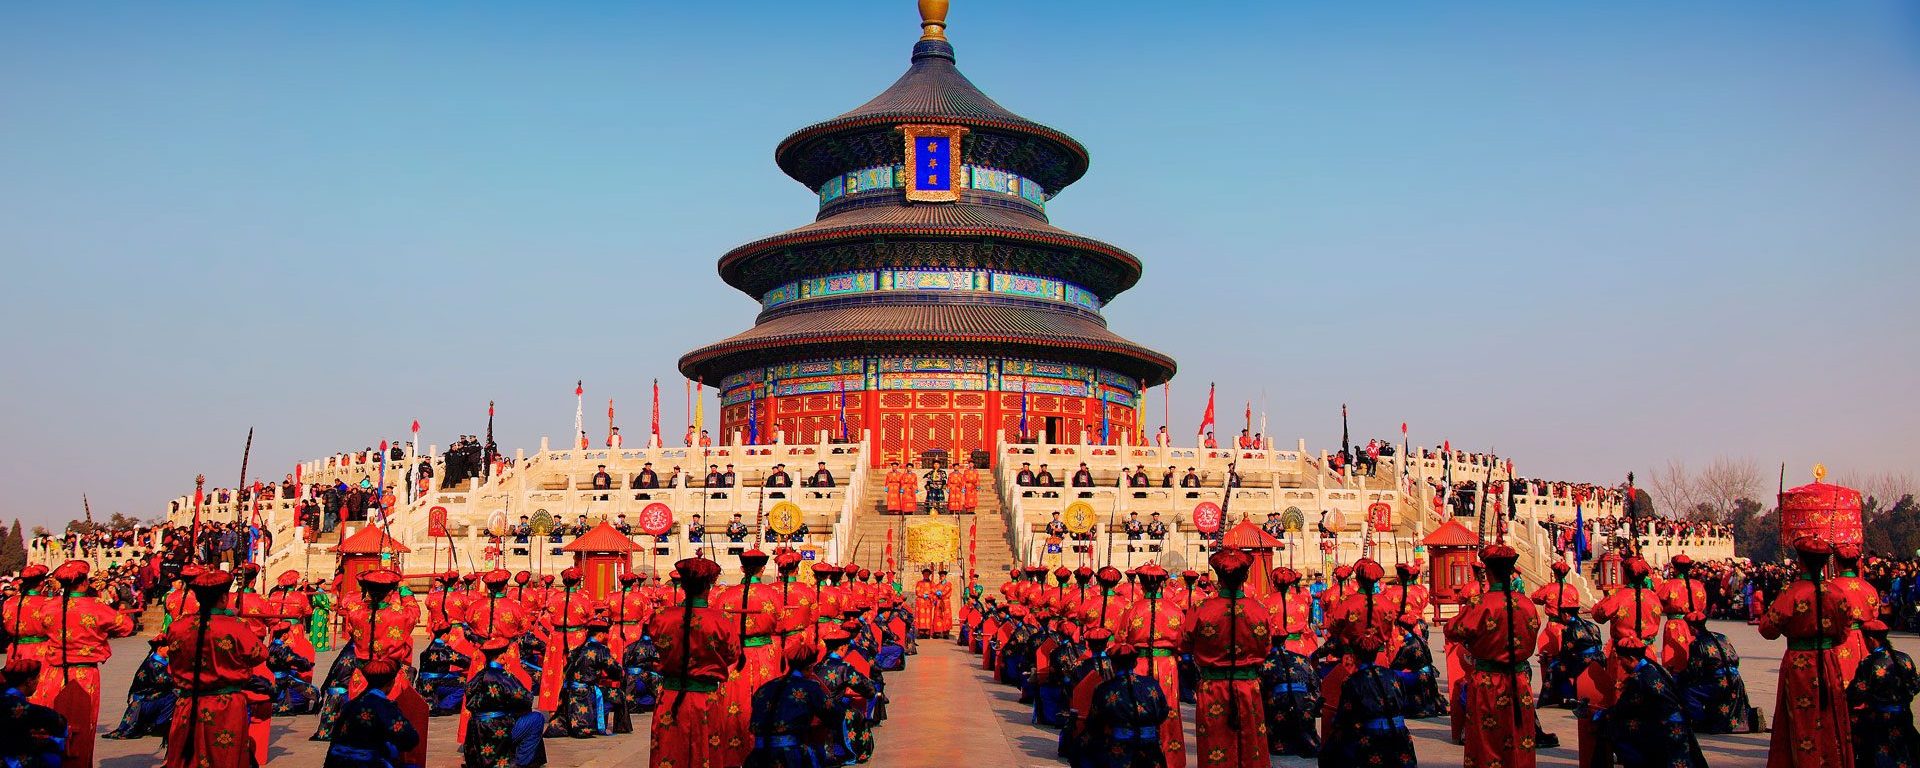 Ancient ritual ceremony during Spring Festival at the Temple of Heaven in Beijing, China